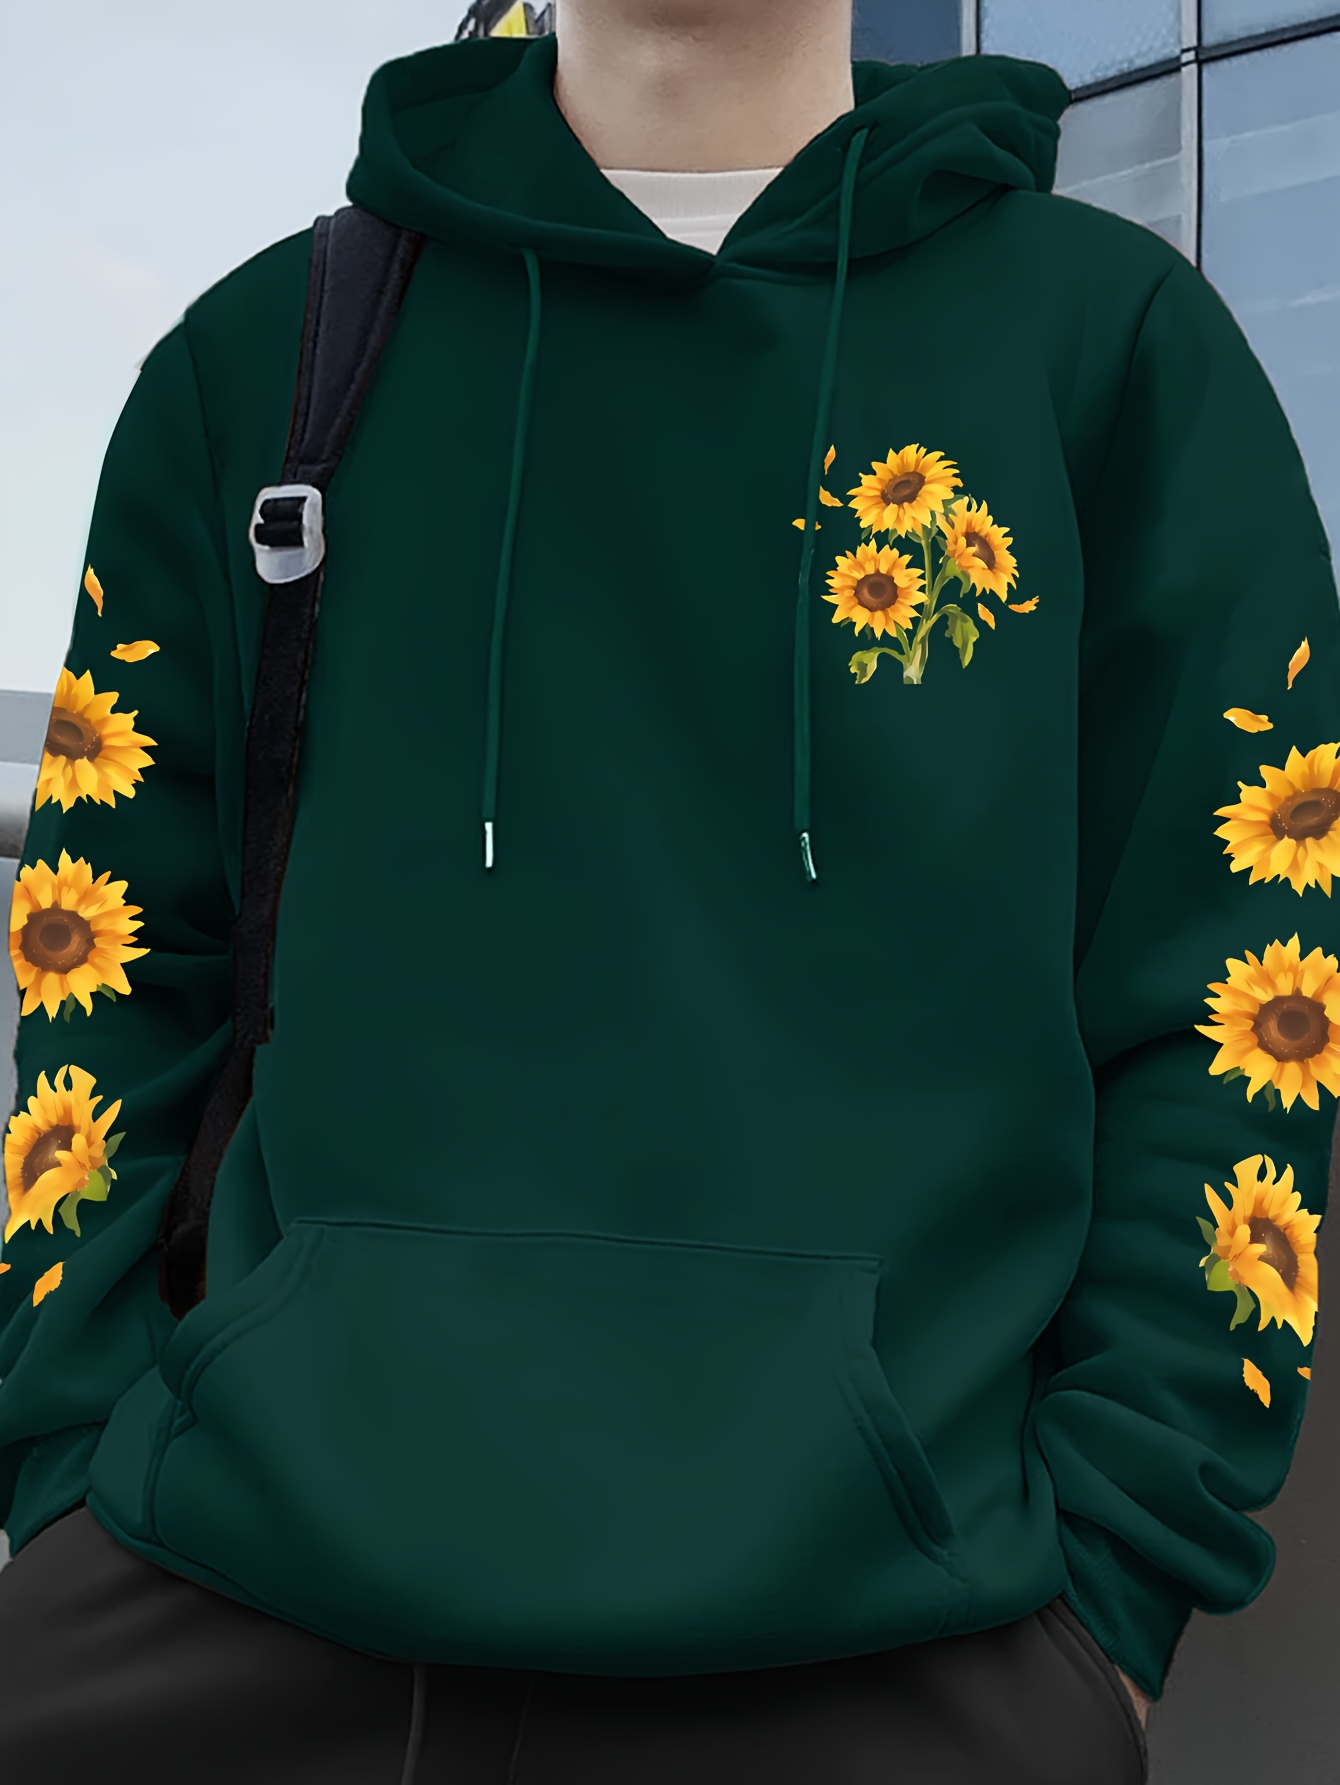 sunflower print mens pullover round neck hoodies with kangaroo pocket long sleeve hooded sweatshirt loose casual top for autumn winter mens clothing as gifts details 0